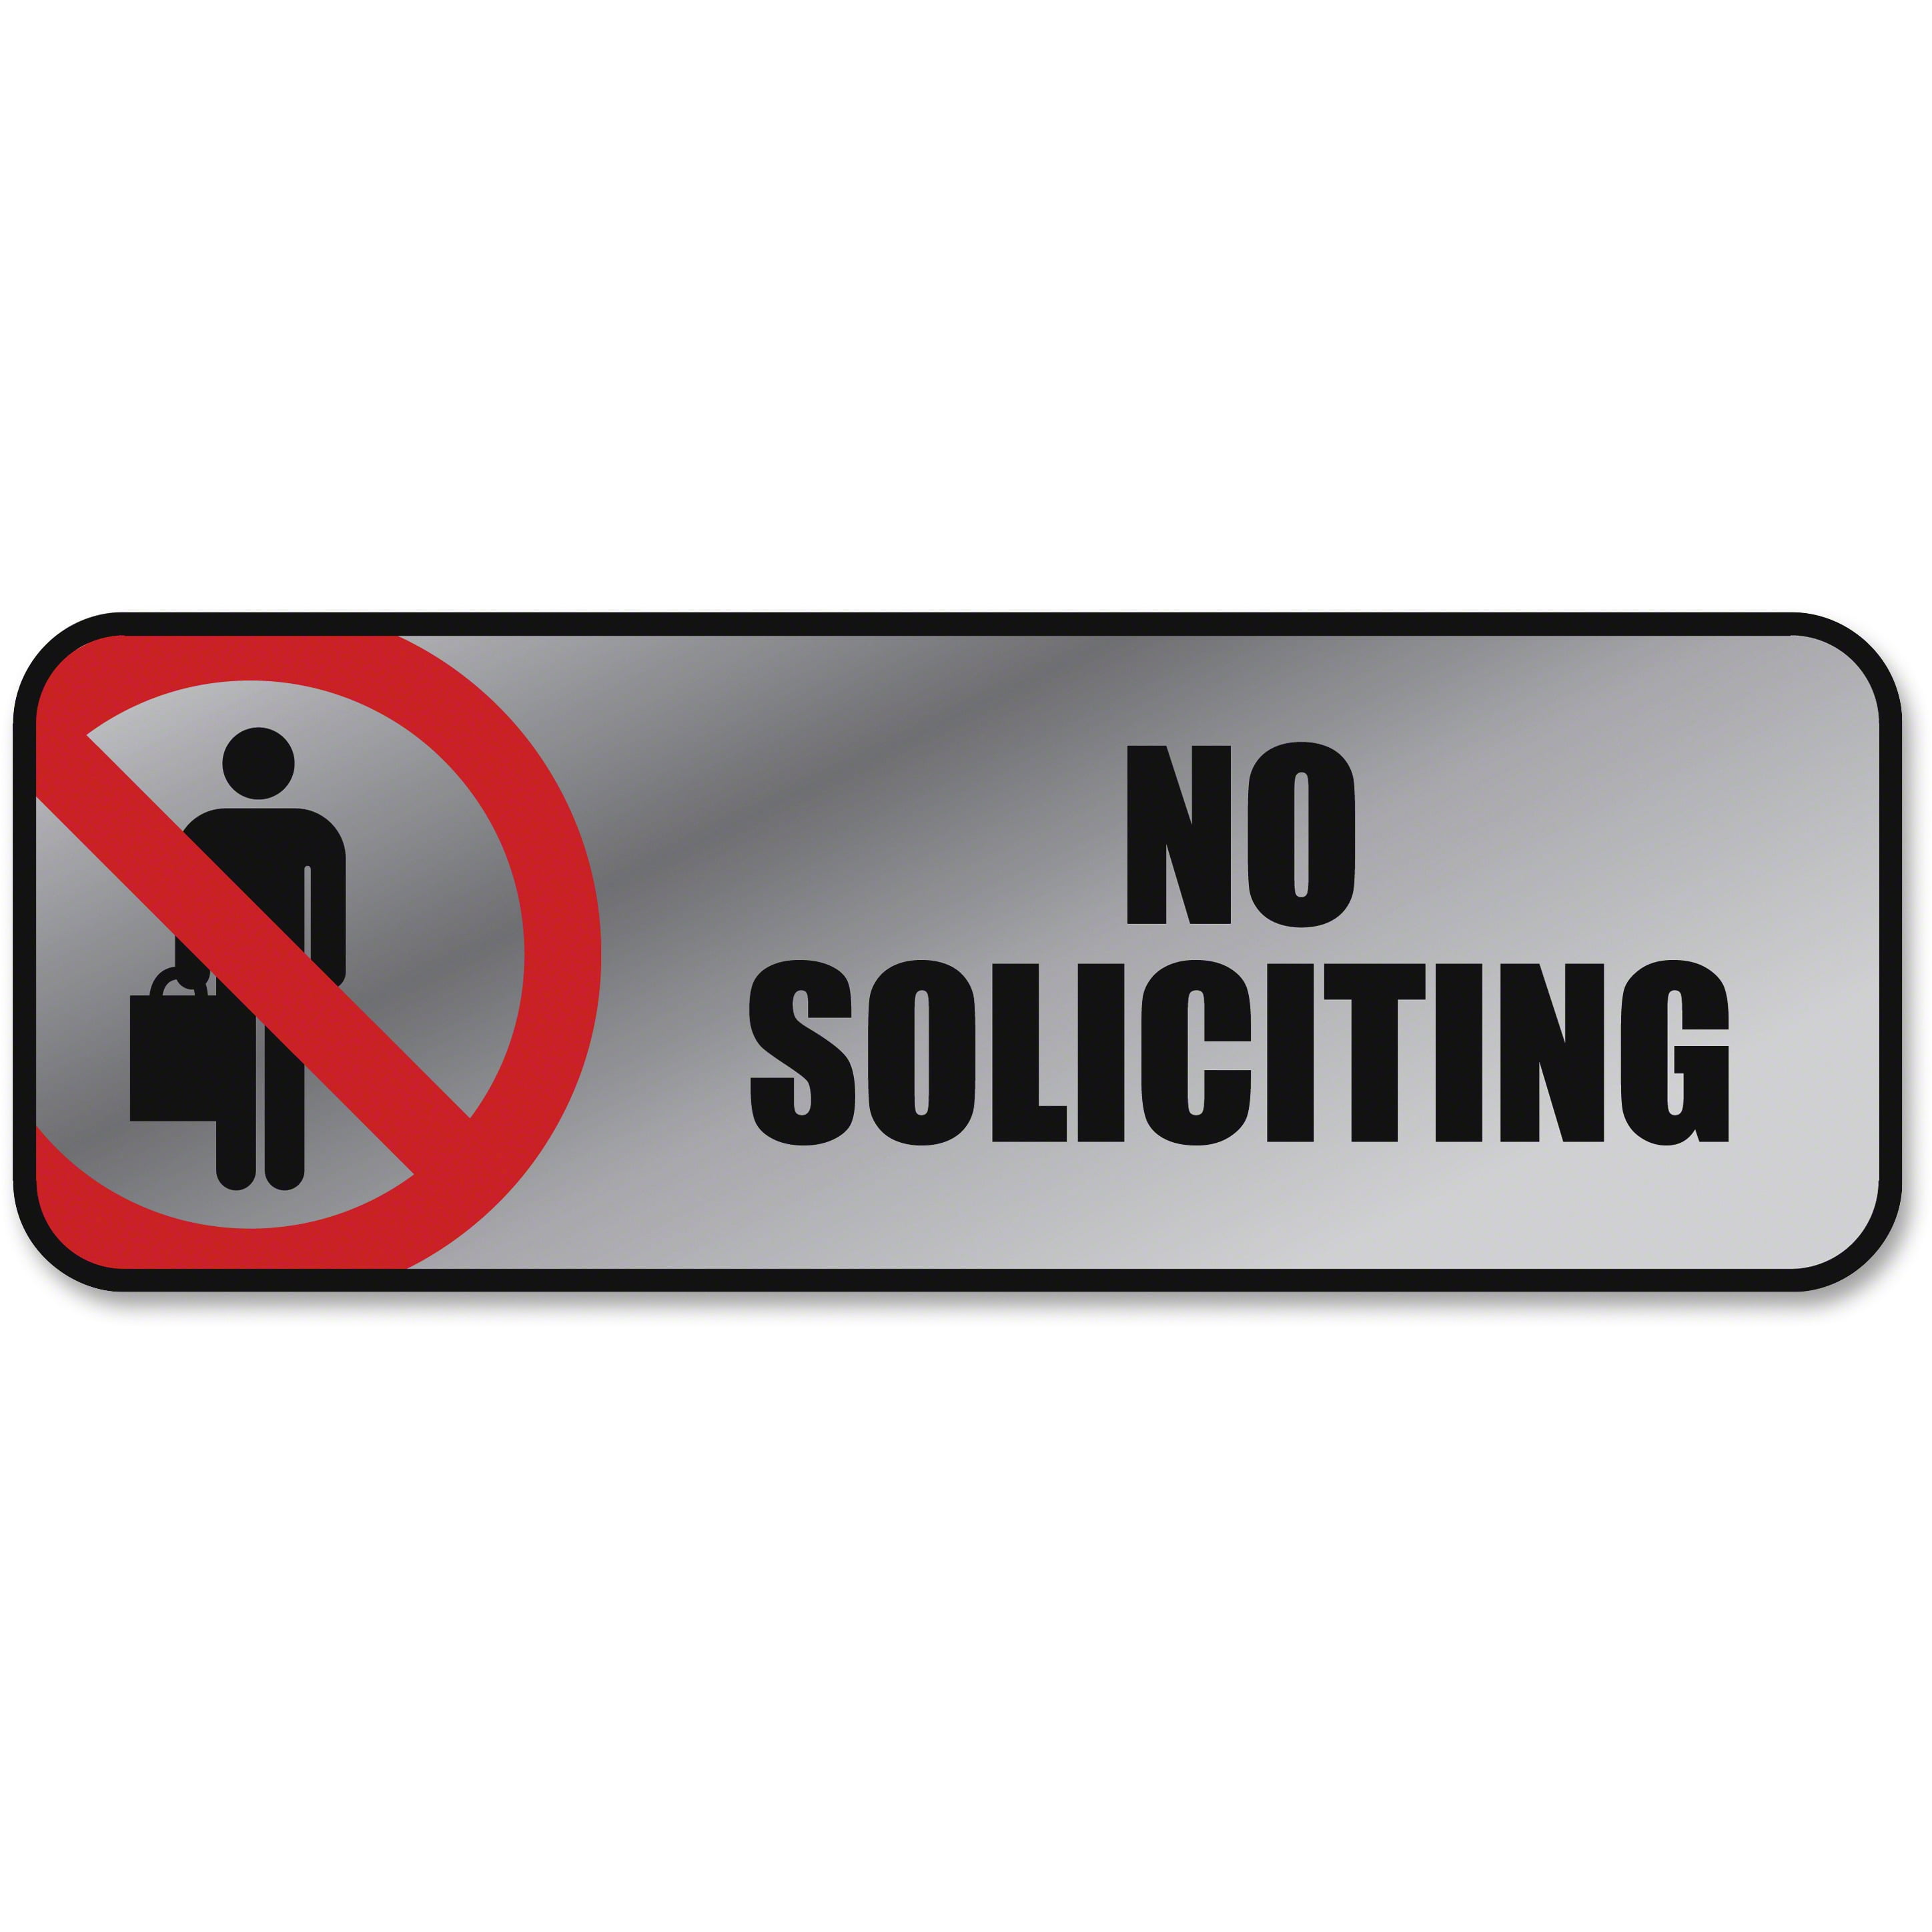 Brushed Silver NO Soliciting Sign Sticker for Business Office or Home. with Bonus red Vinyl Sticker